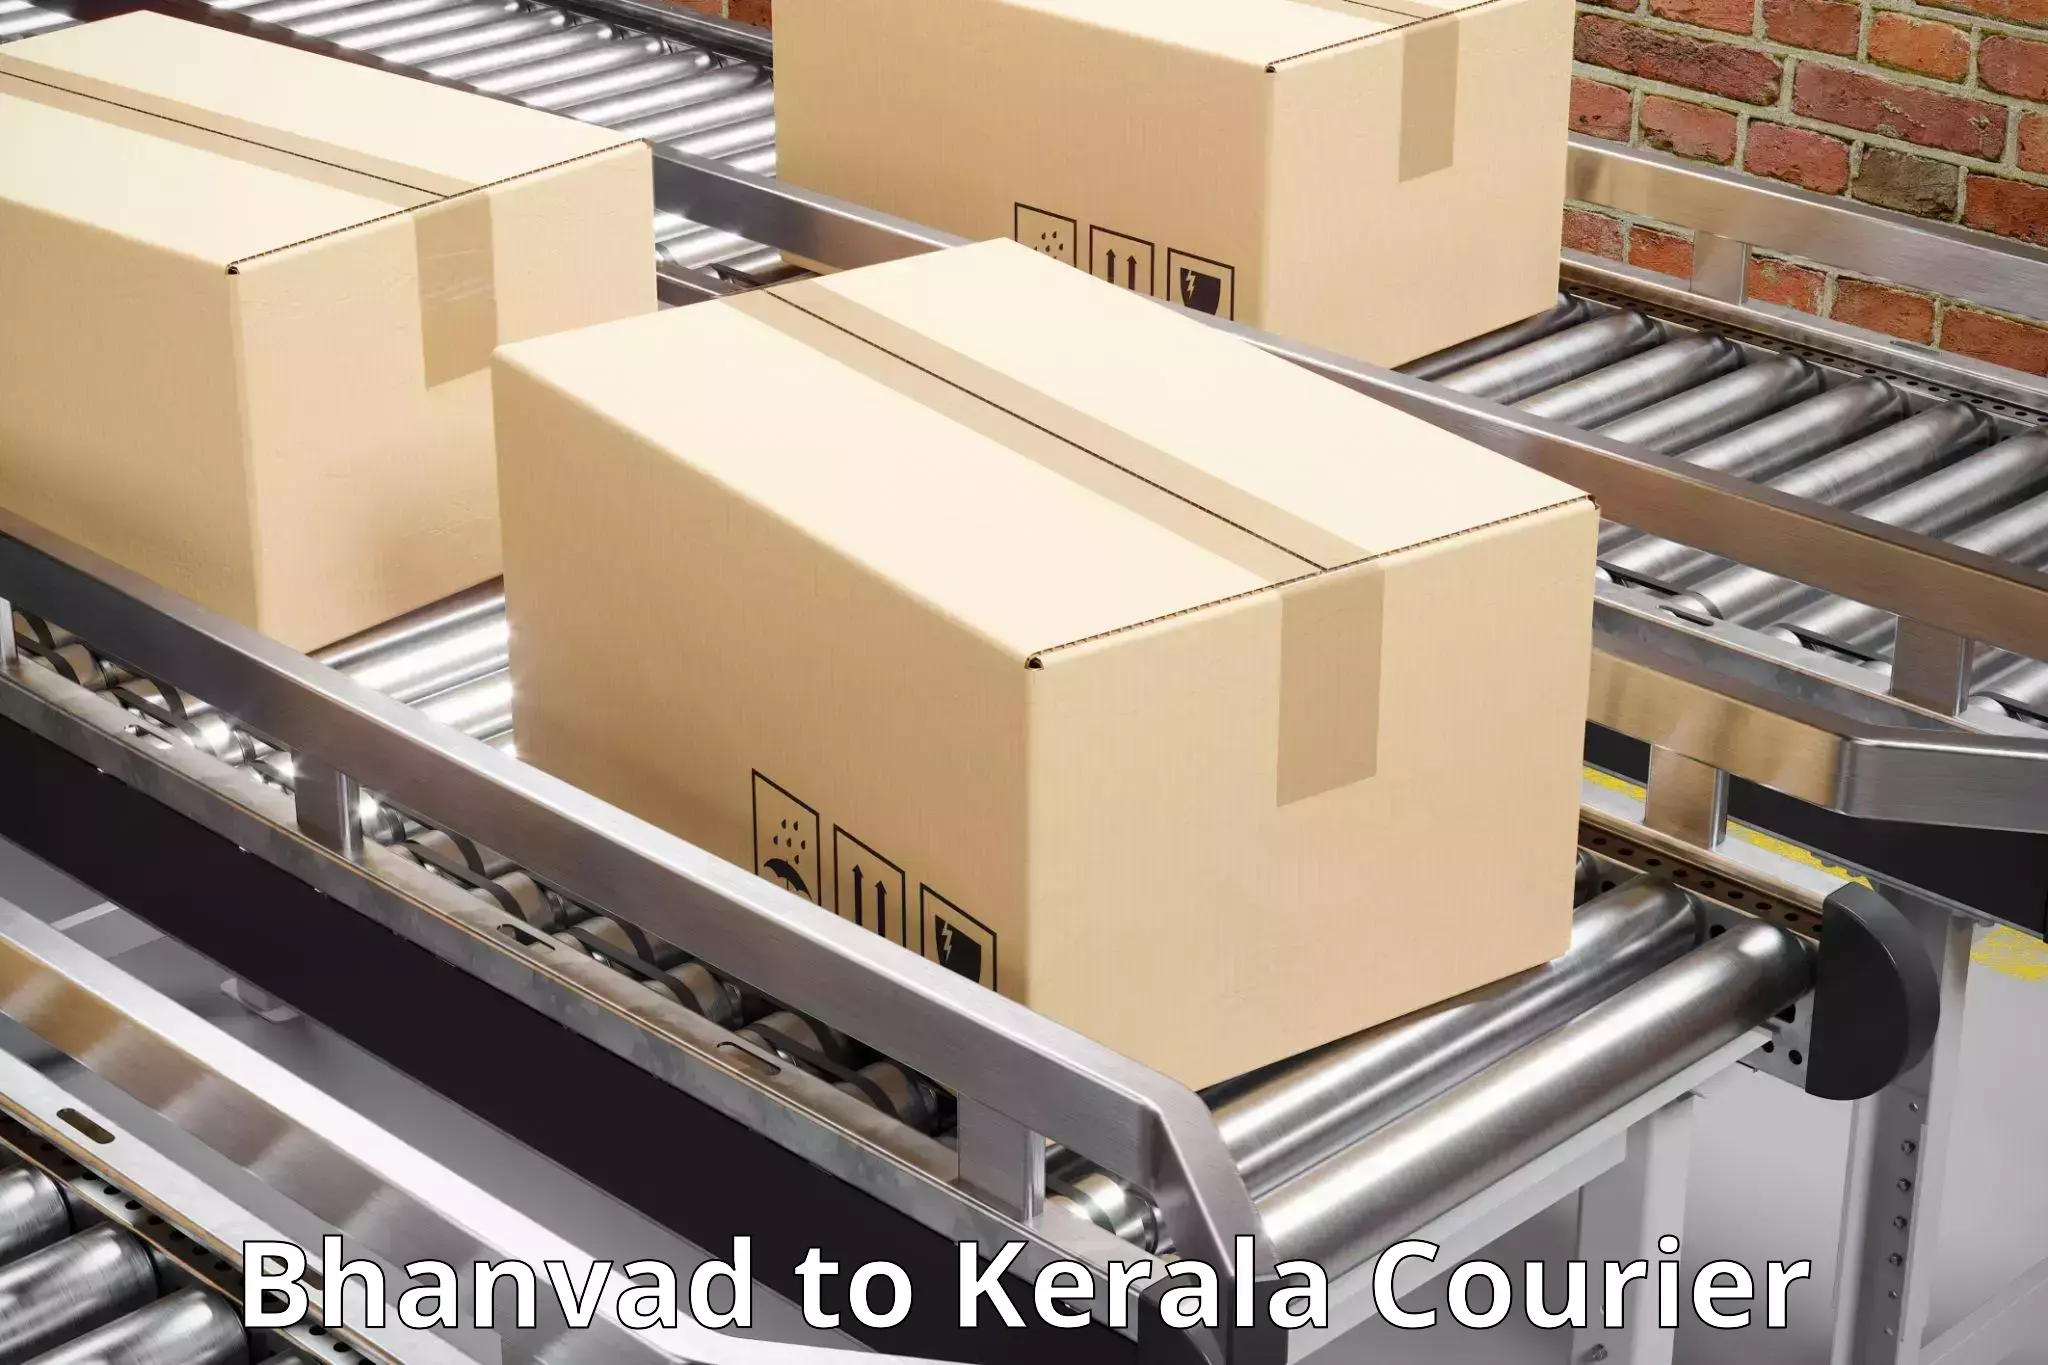 Sustainable delivery practices Bhanvad to Kozhikode